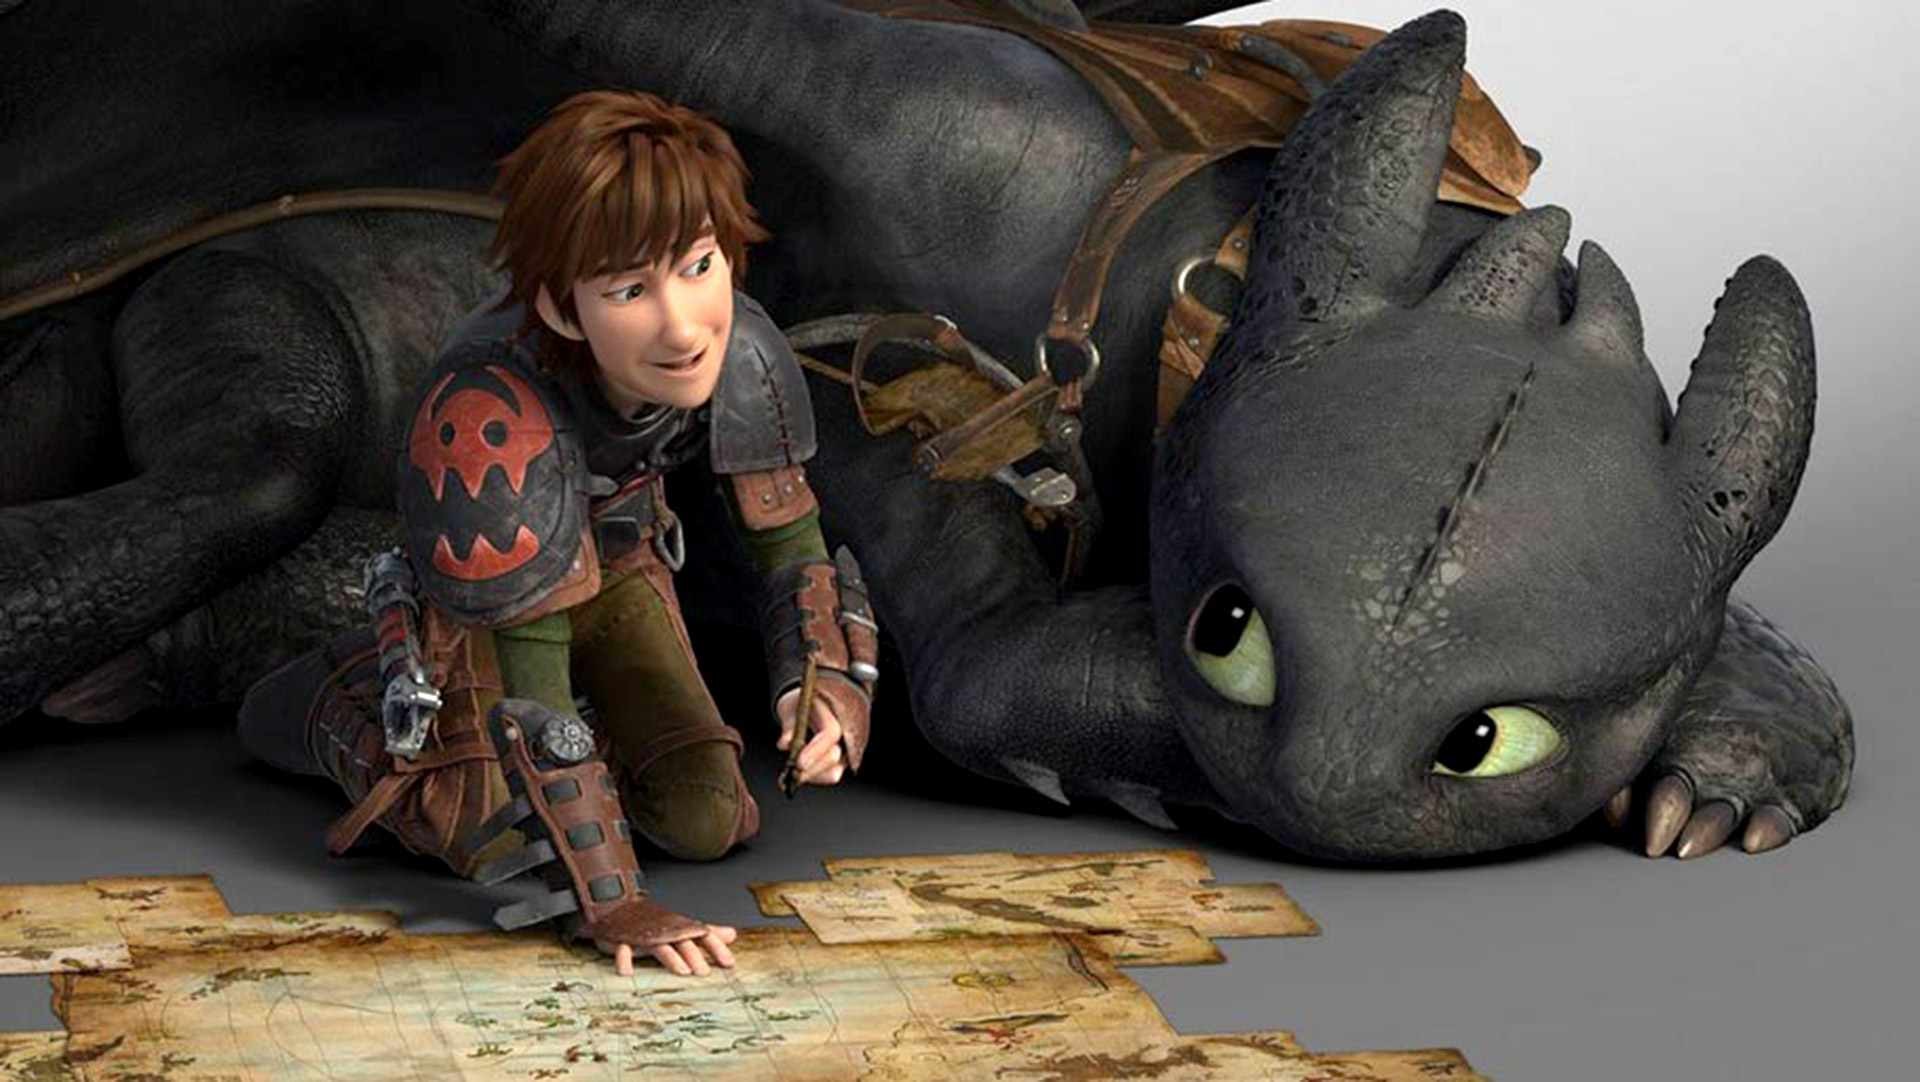 1920x1082 how-to-train-your-dragon-2-wallpaper-hd-